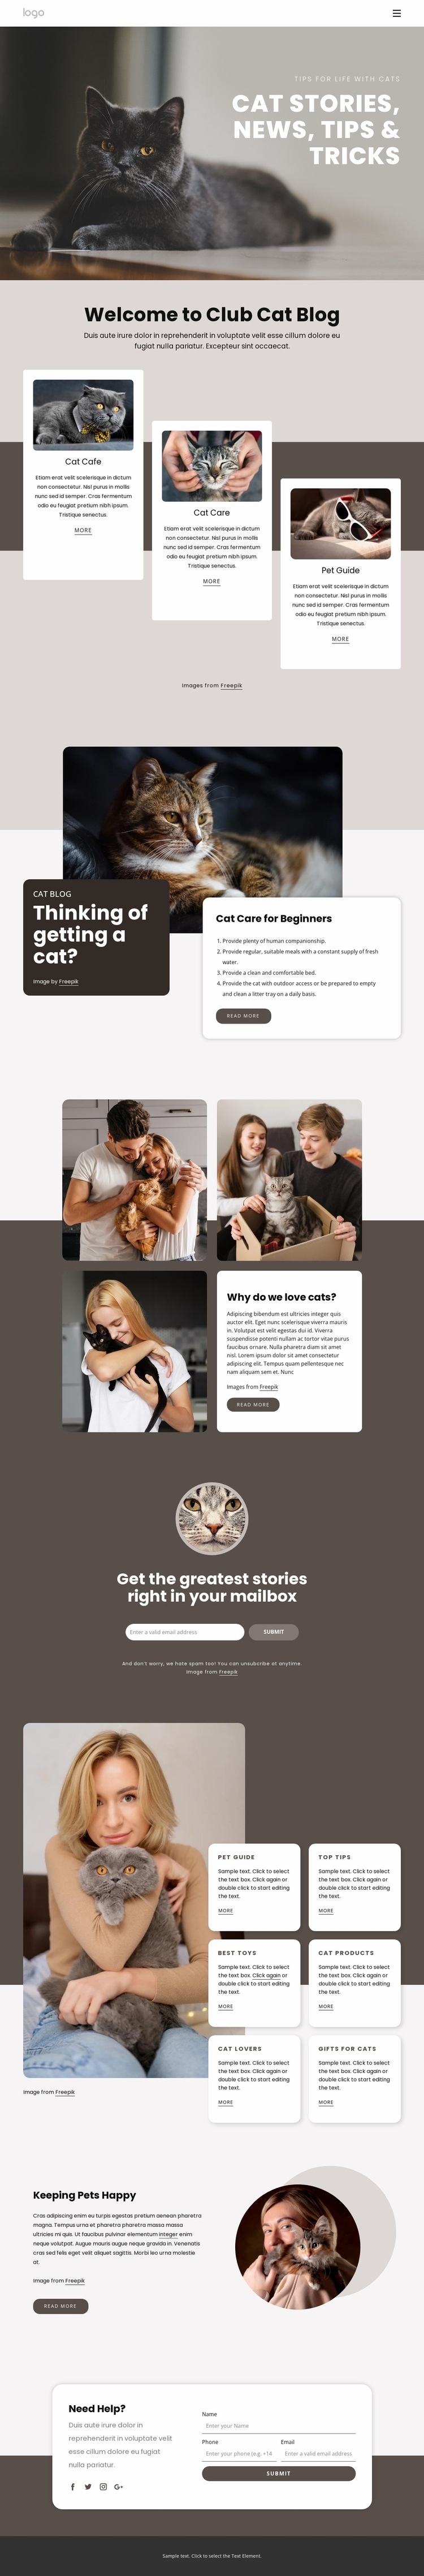 Cat stories, tips and tricks Web Page Design